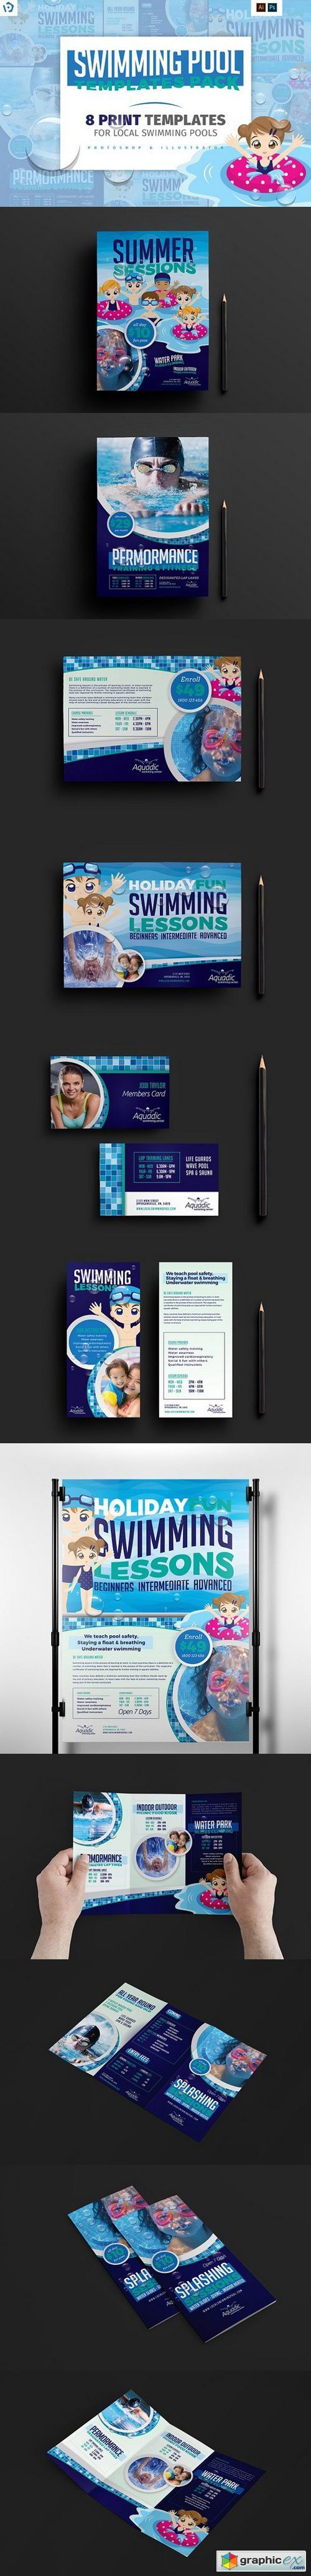 Swimming Pool Templates Pack